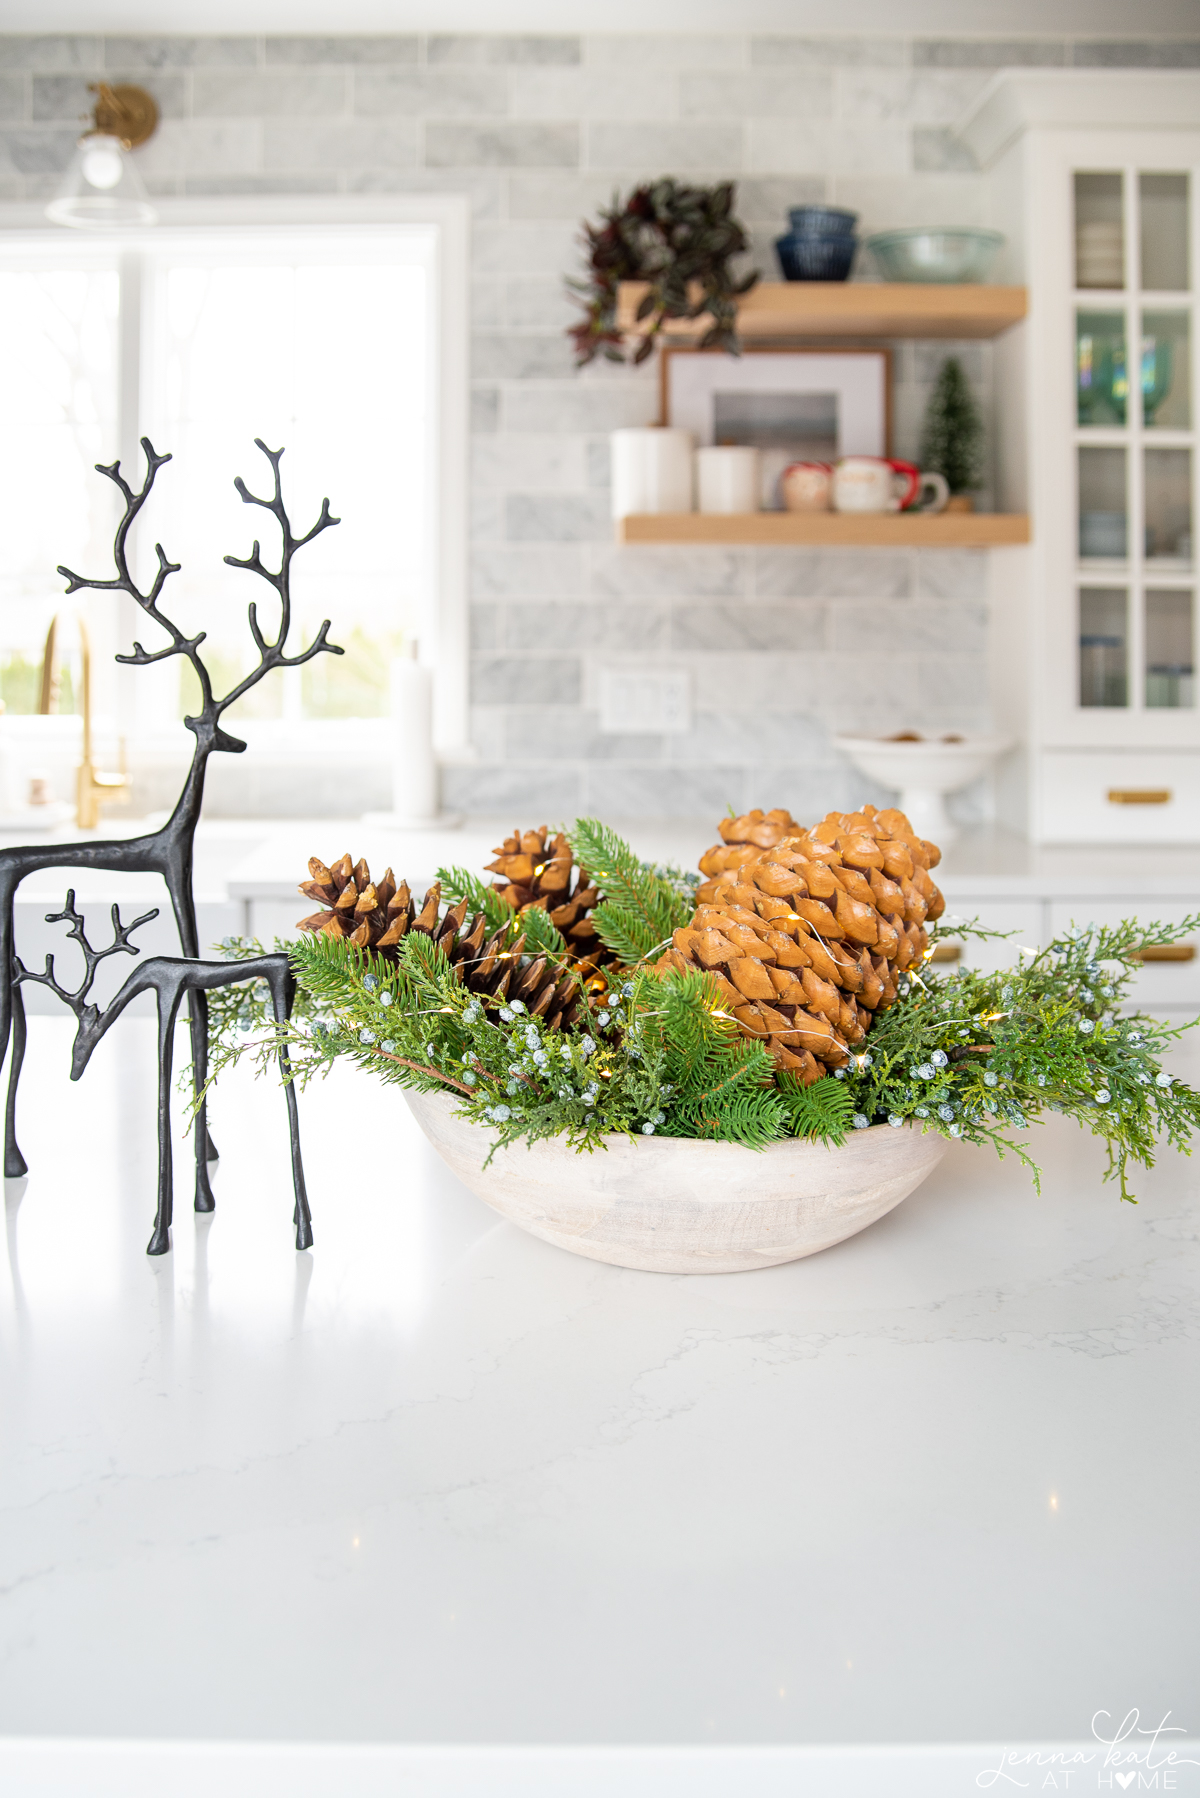 a centerpiece display including a bowl filled with greenery and pine cones and a couple of fake deer statues